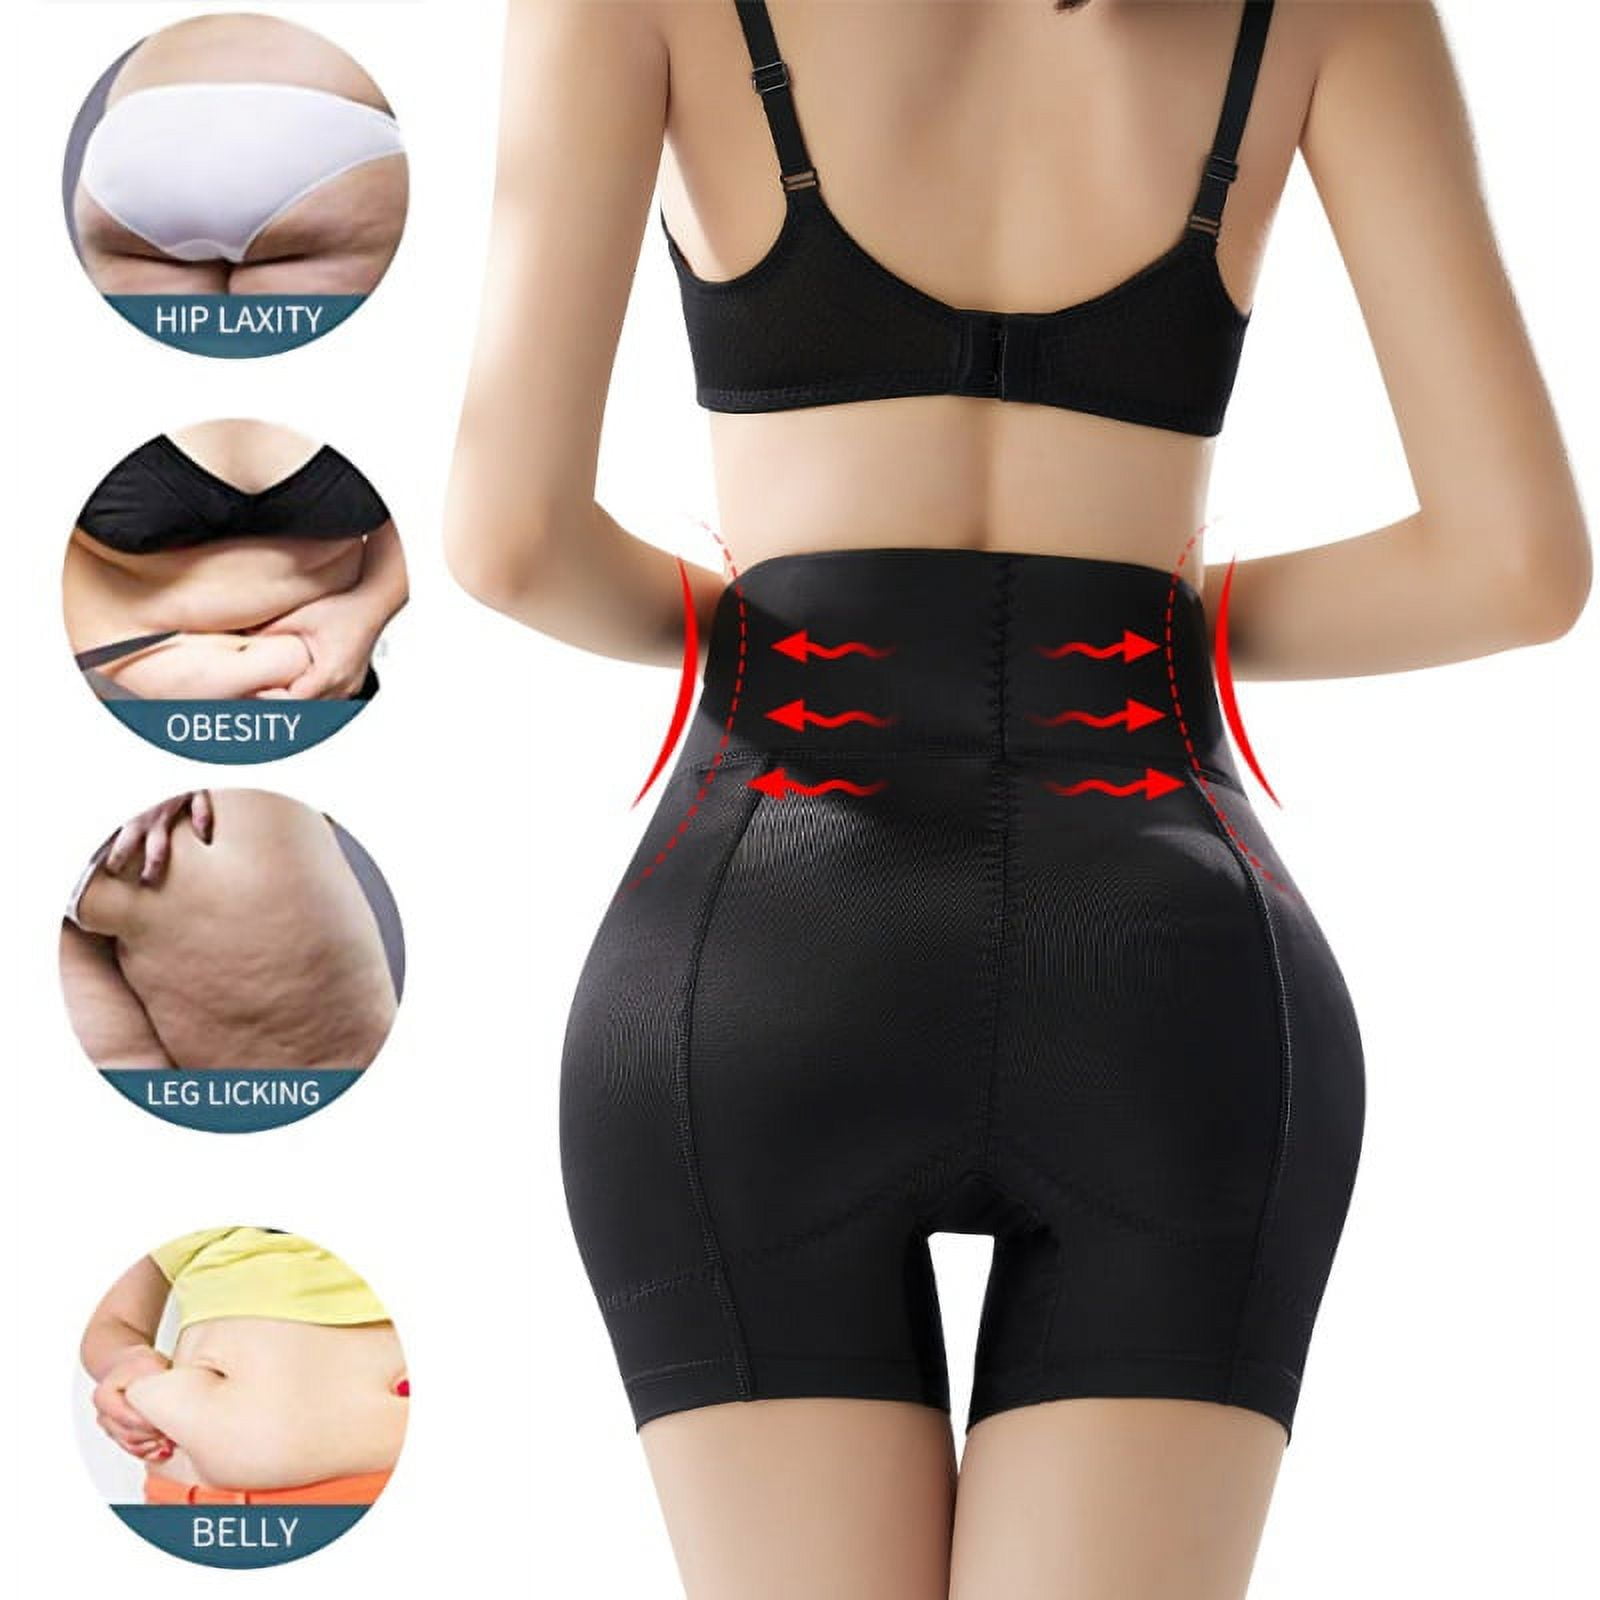 Big Clear!] High Waist Invisible Hip Enhancer Shapewear Padded Butt Lifter Body  Shaper Underwear Women Pads Push Up Control Panties Shaping Boyshort Briefs  ,Any time you want to look more 